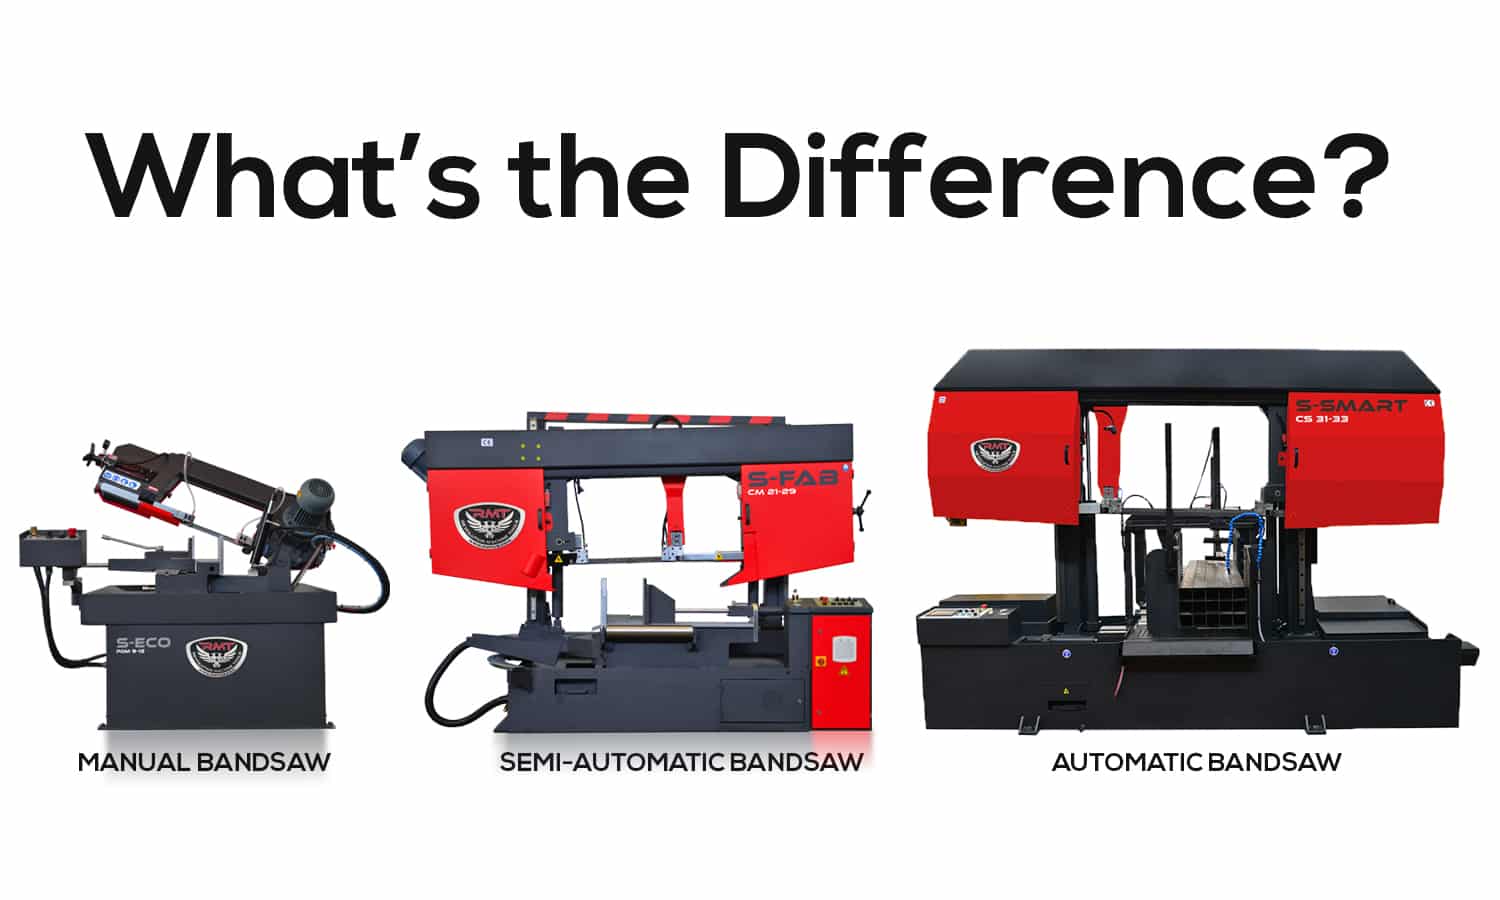 The Difference Between Manual, Semiautomatic, and Automatic Bandsaws